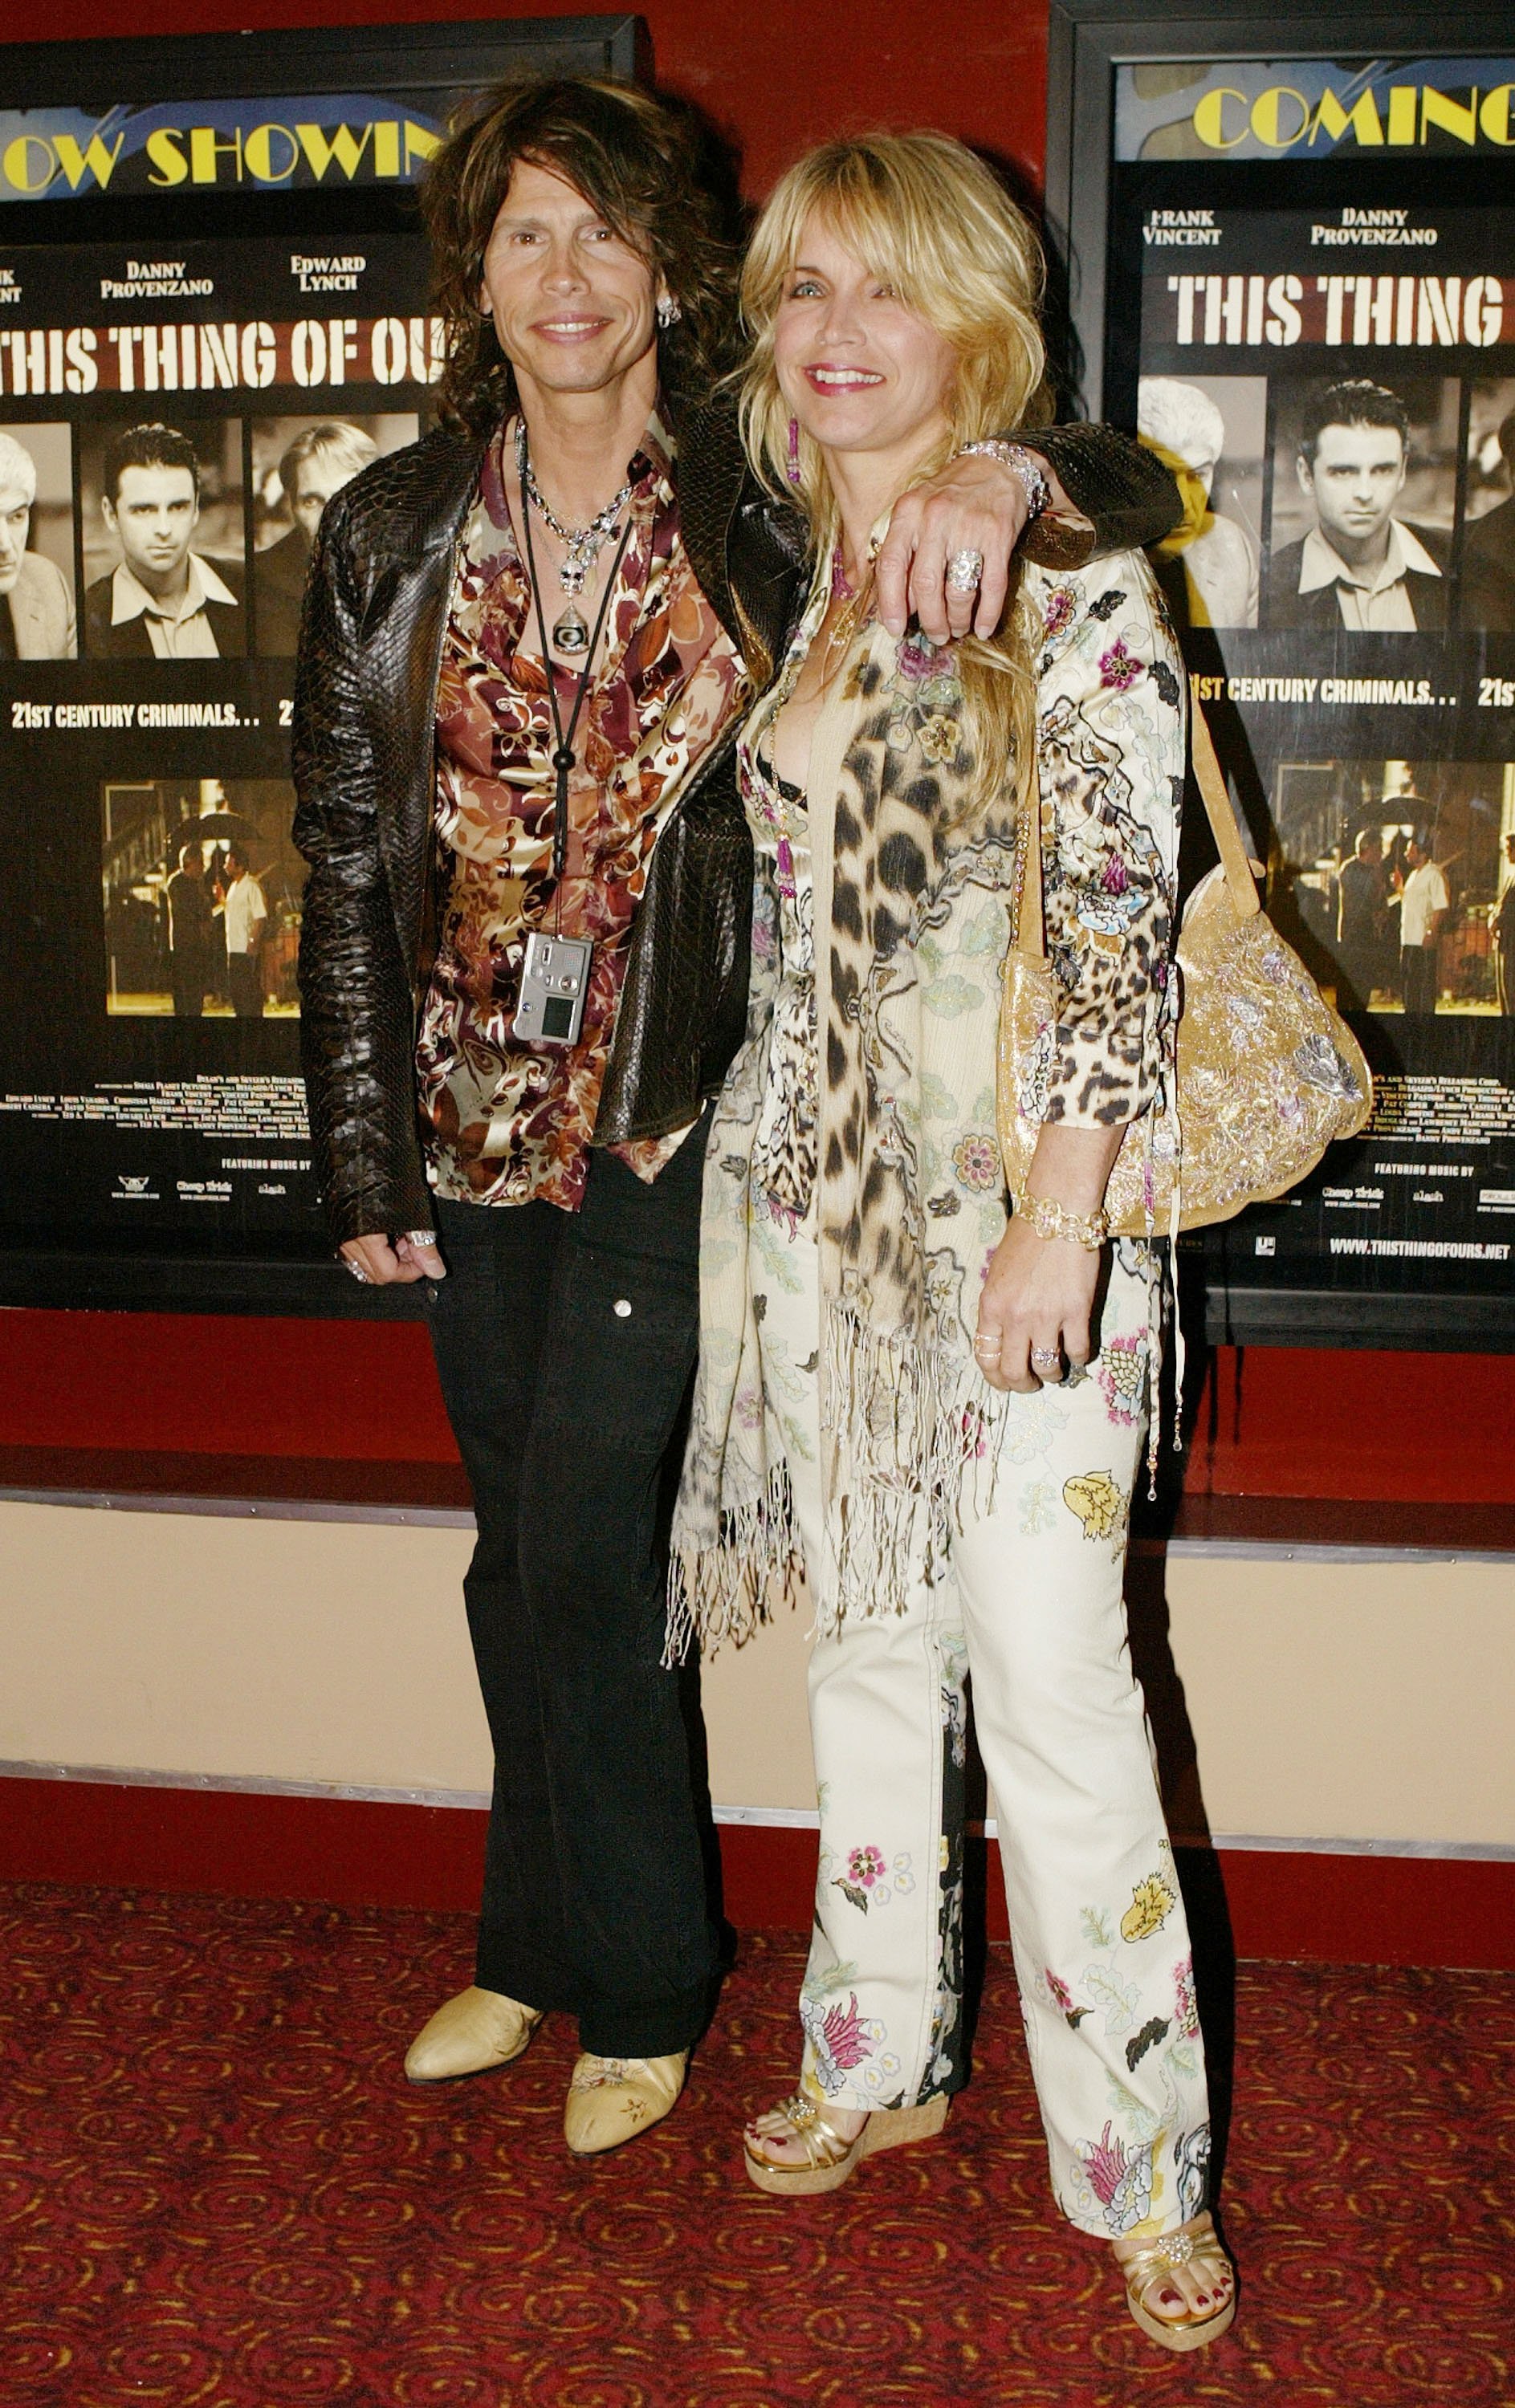 Steven Tyler and Teresa Barrick pose for a photo at the premiere of "This Thing of Ours" at the Village East Cinema July 16, 2003, in New York City | Source: Getty Images